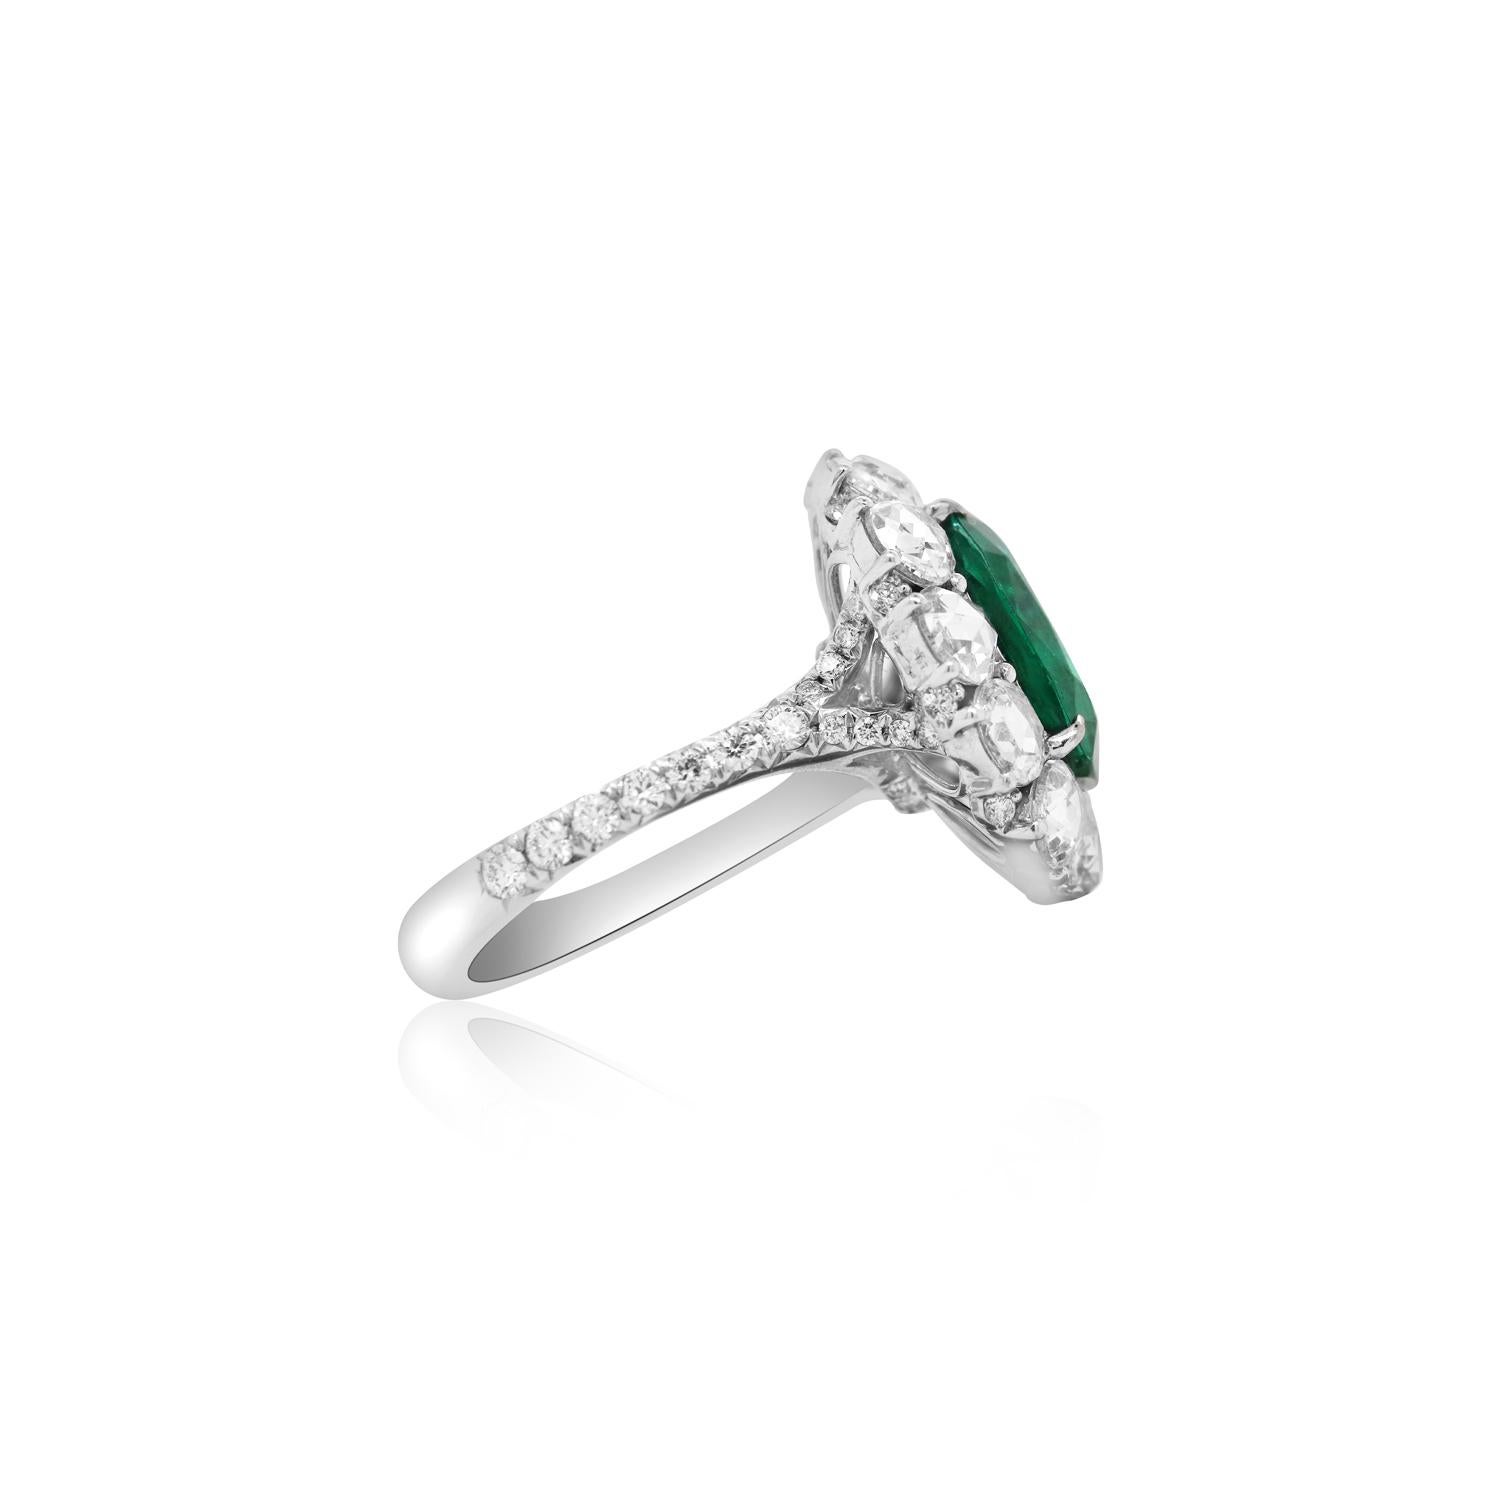 Metal: 18K White Gold

Center Stone: 1 Cushion Cut Zambian Emerald at 4.82 Carats - Measuring 12 x 10 millimeters

Diamond Details: 12 Rose Cut Round White Diamonds at 2.49 Carats Total Weight

Ring size: Customizable

Fine one-of-a-kind